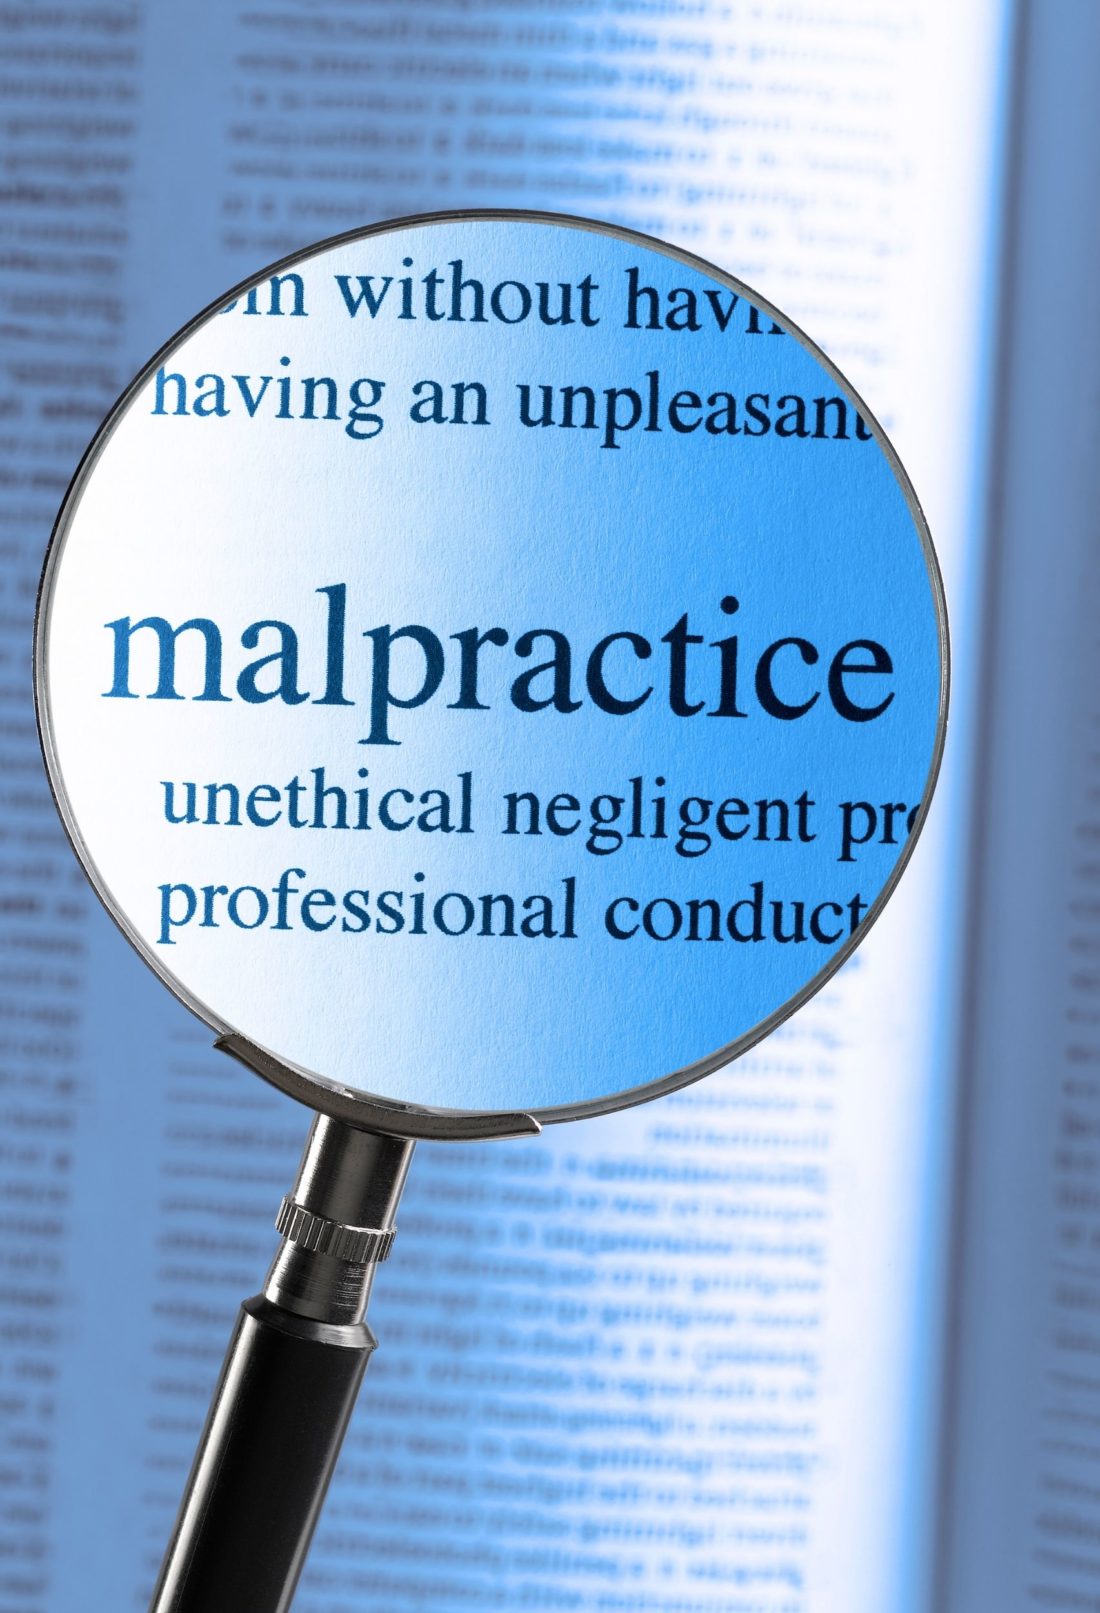 _4 basic requirements that help establish you have cause for a malpractice suit- Rita Reviews